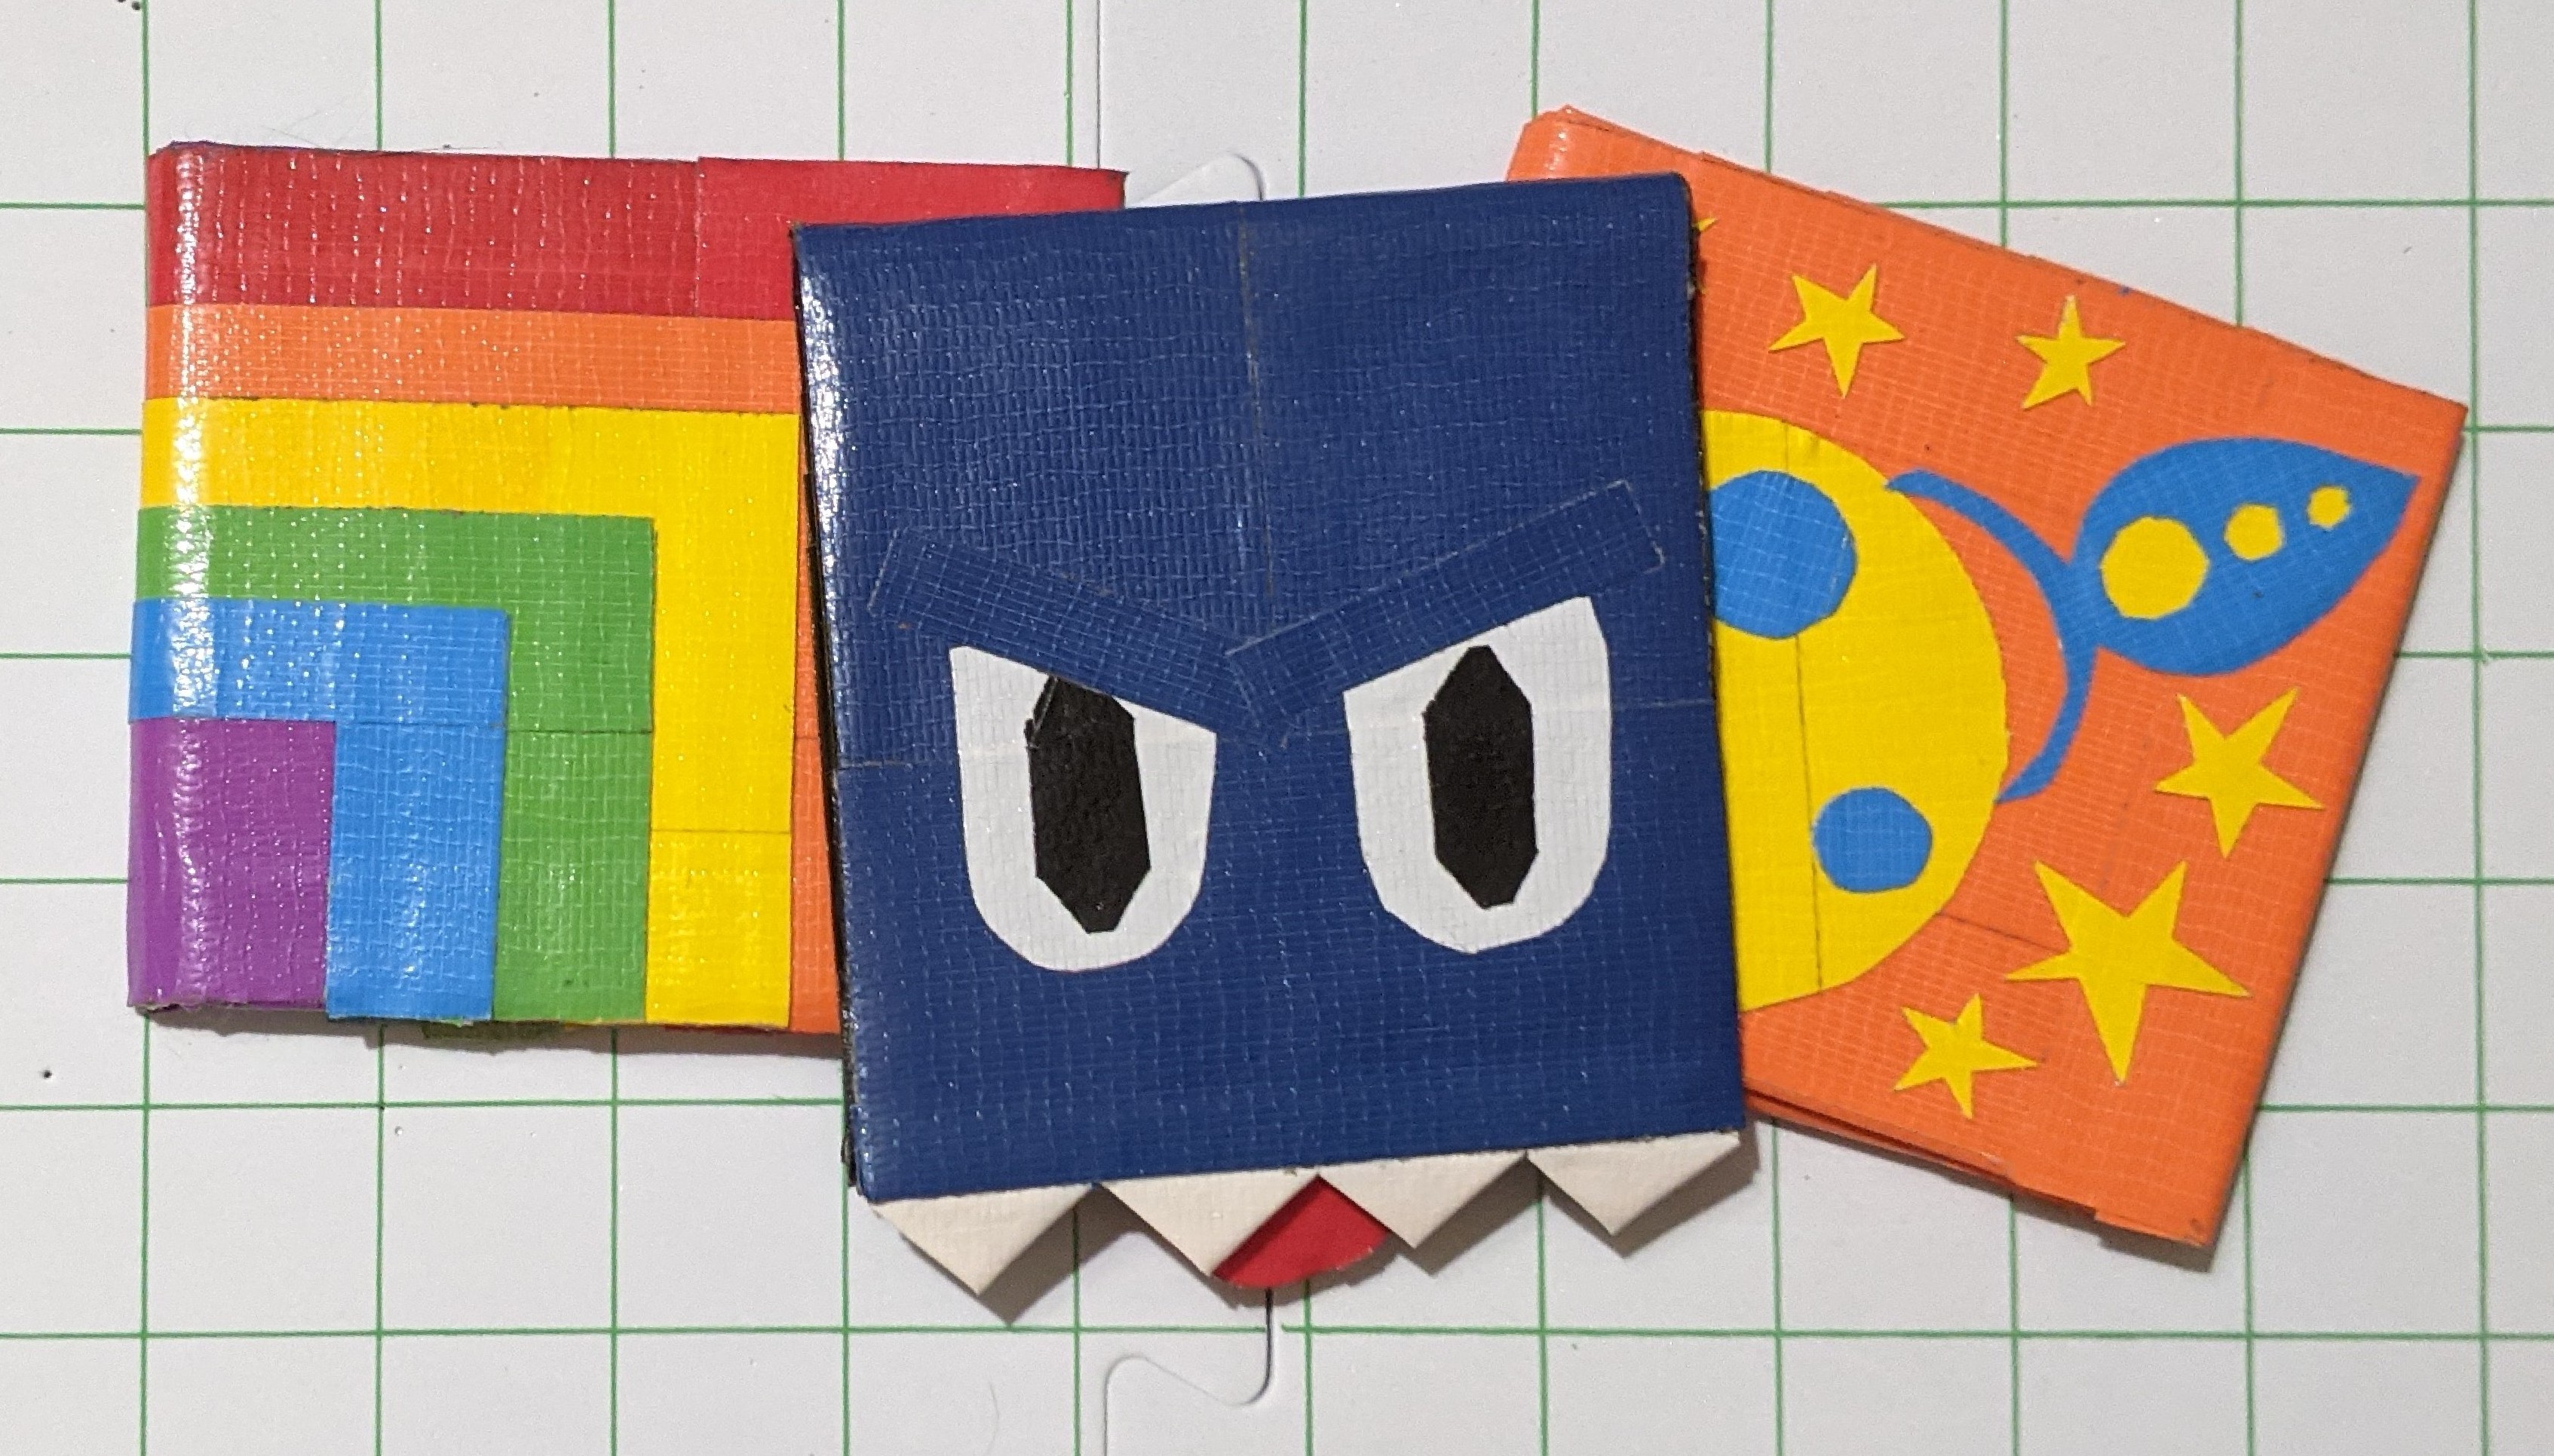 Three duct tape wallets with decorative covers: a rainbow, a rocket ship on the moon, and a grumpy monster. The opening of the wallet is its mouth.